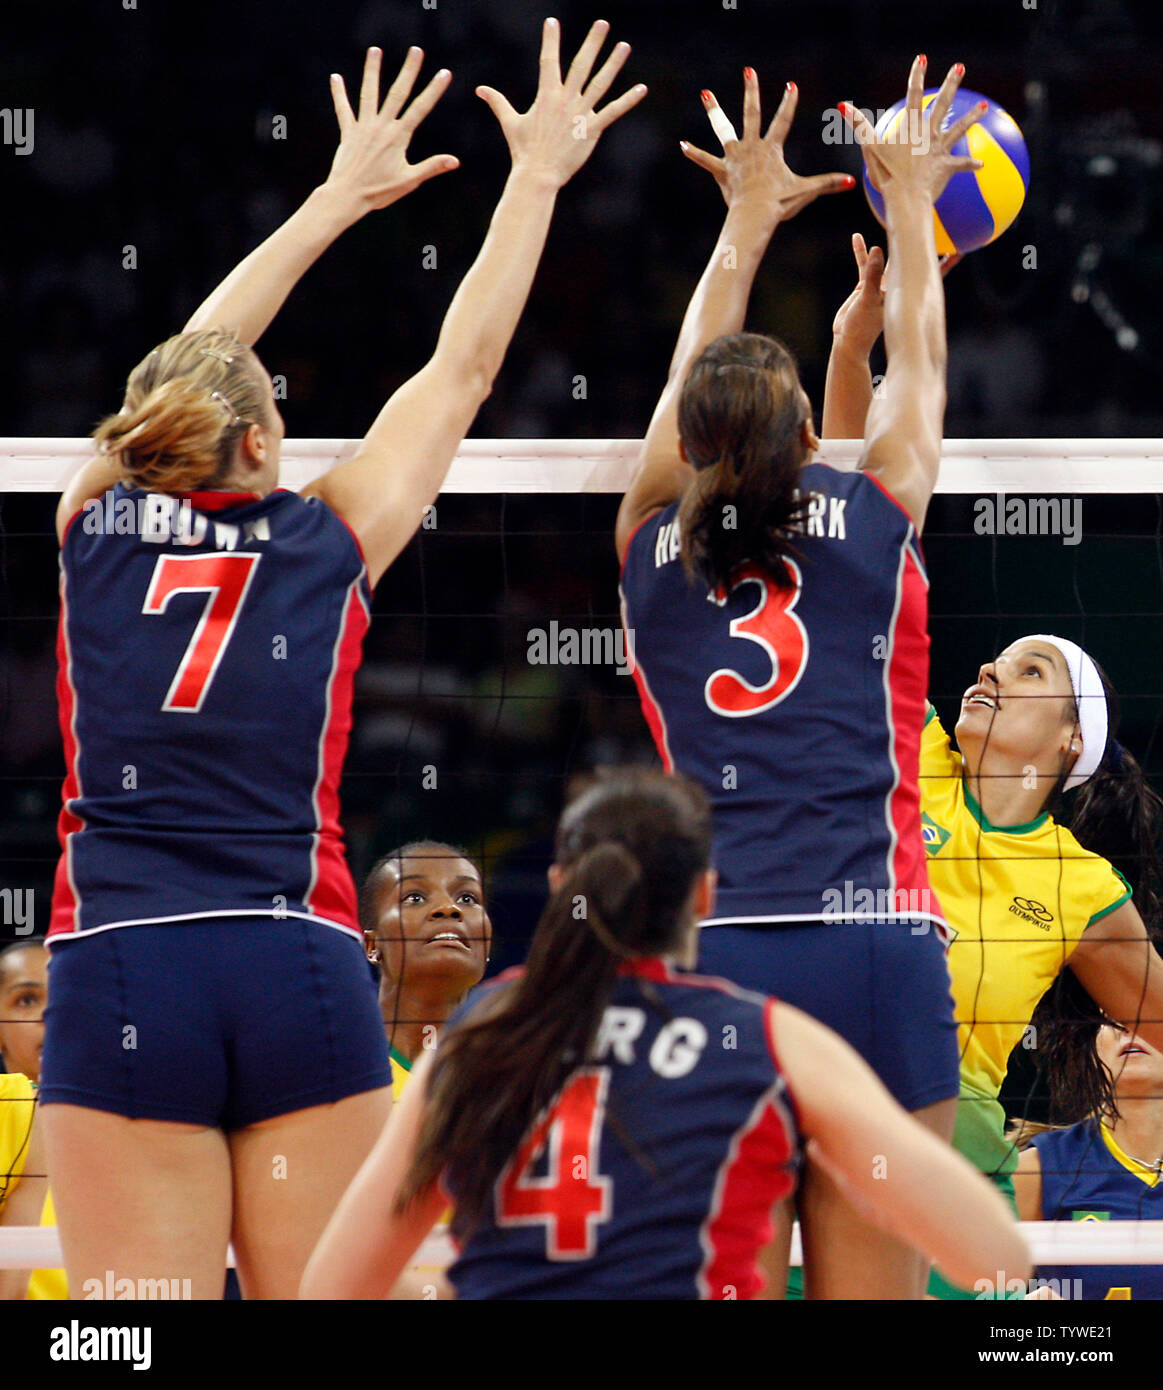 Brazil's Paula Pequeno's (R) spike is blocked by USA's defenders (L-R) Heather Bown, Lindsey Berg and Tayyiba Haneff-Park in the women's volleyball final during the Beijing 2008 Olympic Games August 23, 2008. Brazil won the match 3-1, taking the gold, while USA settled for silver and China the bronze.  (UPI Photo/Stephen Shaver) Stock Photo